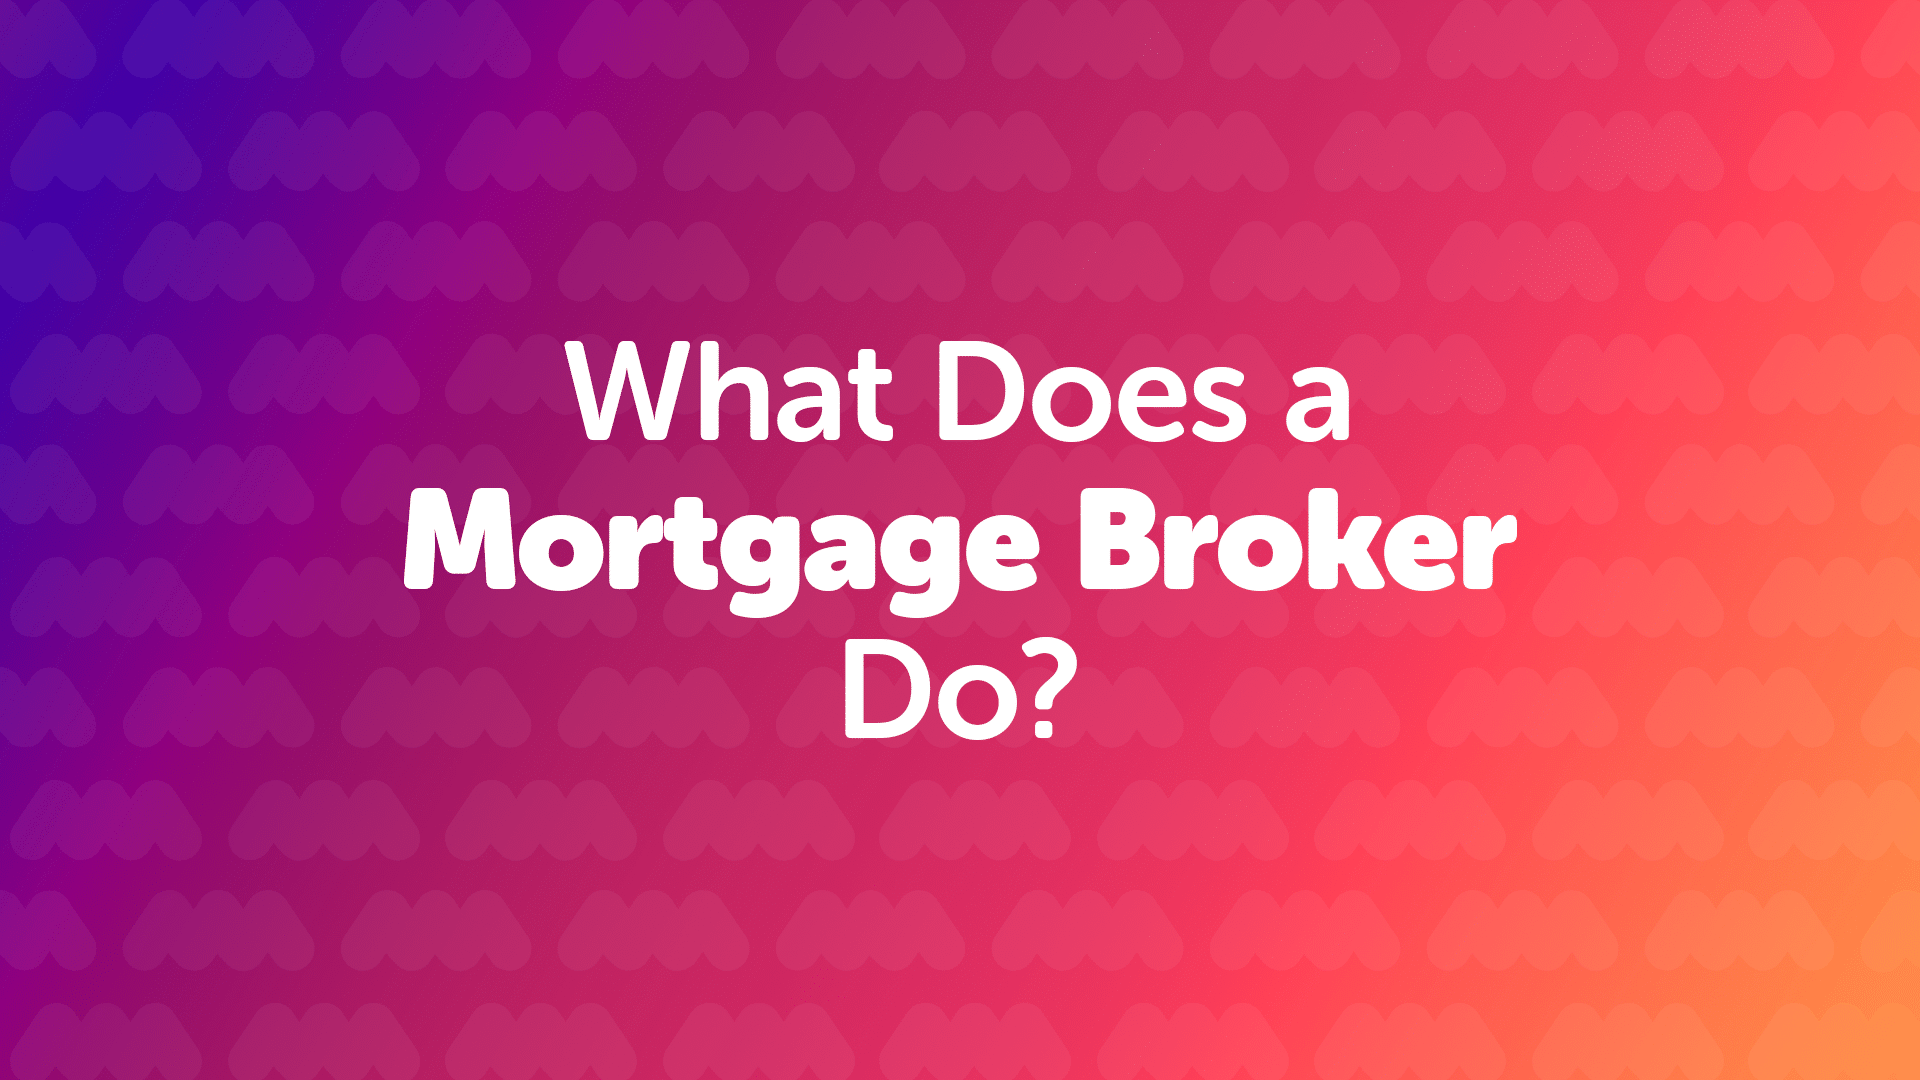 What Does a Mortgage Broker in Nottingham Do?